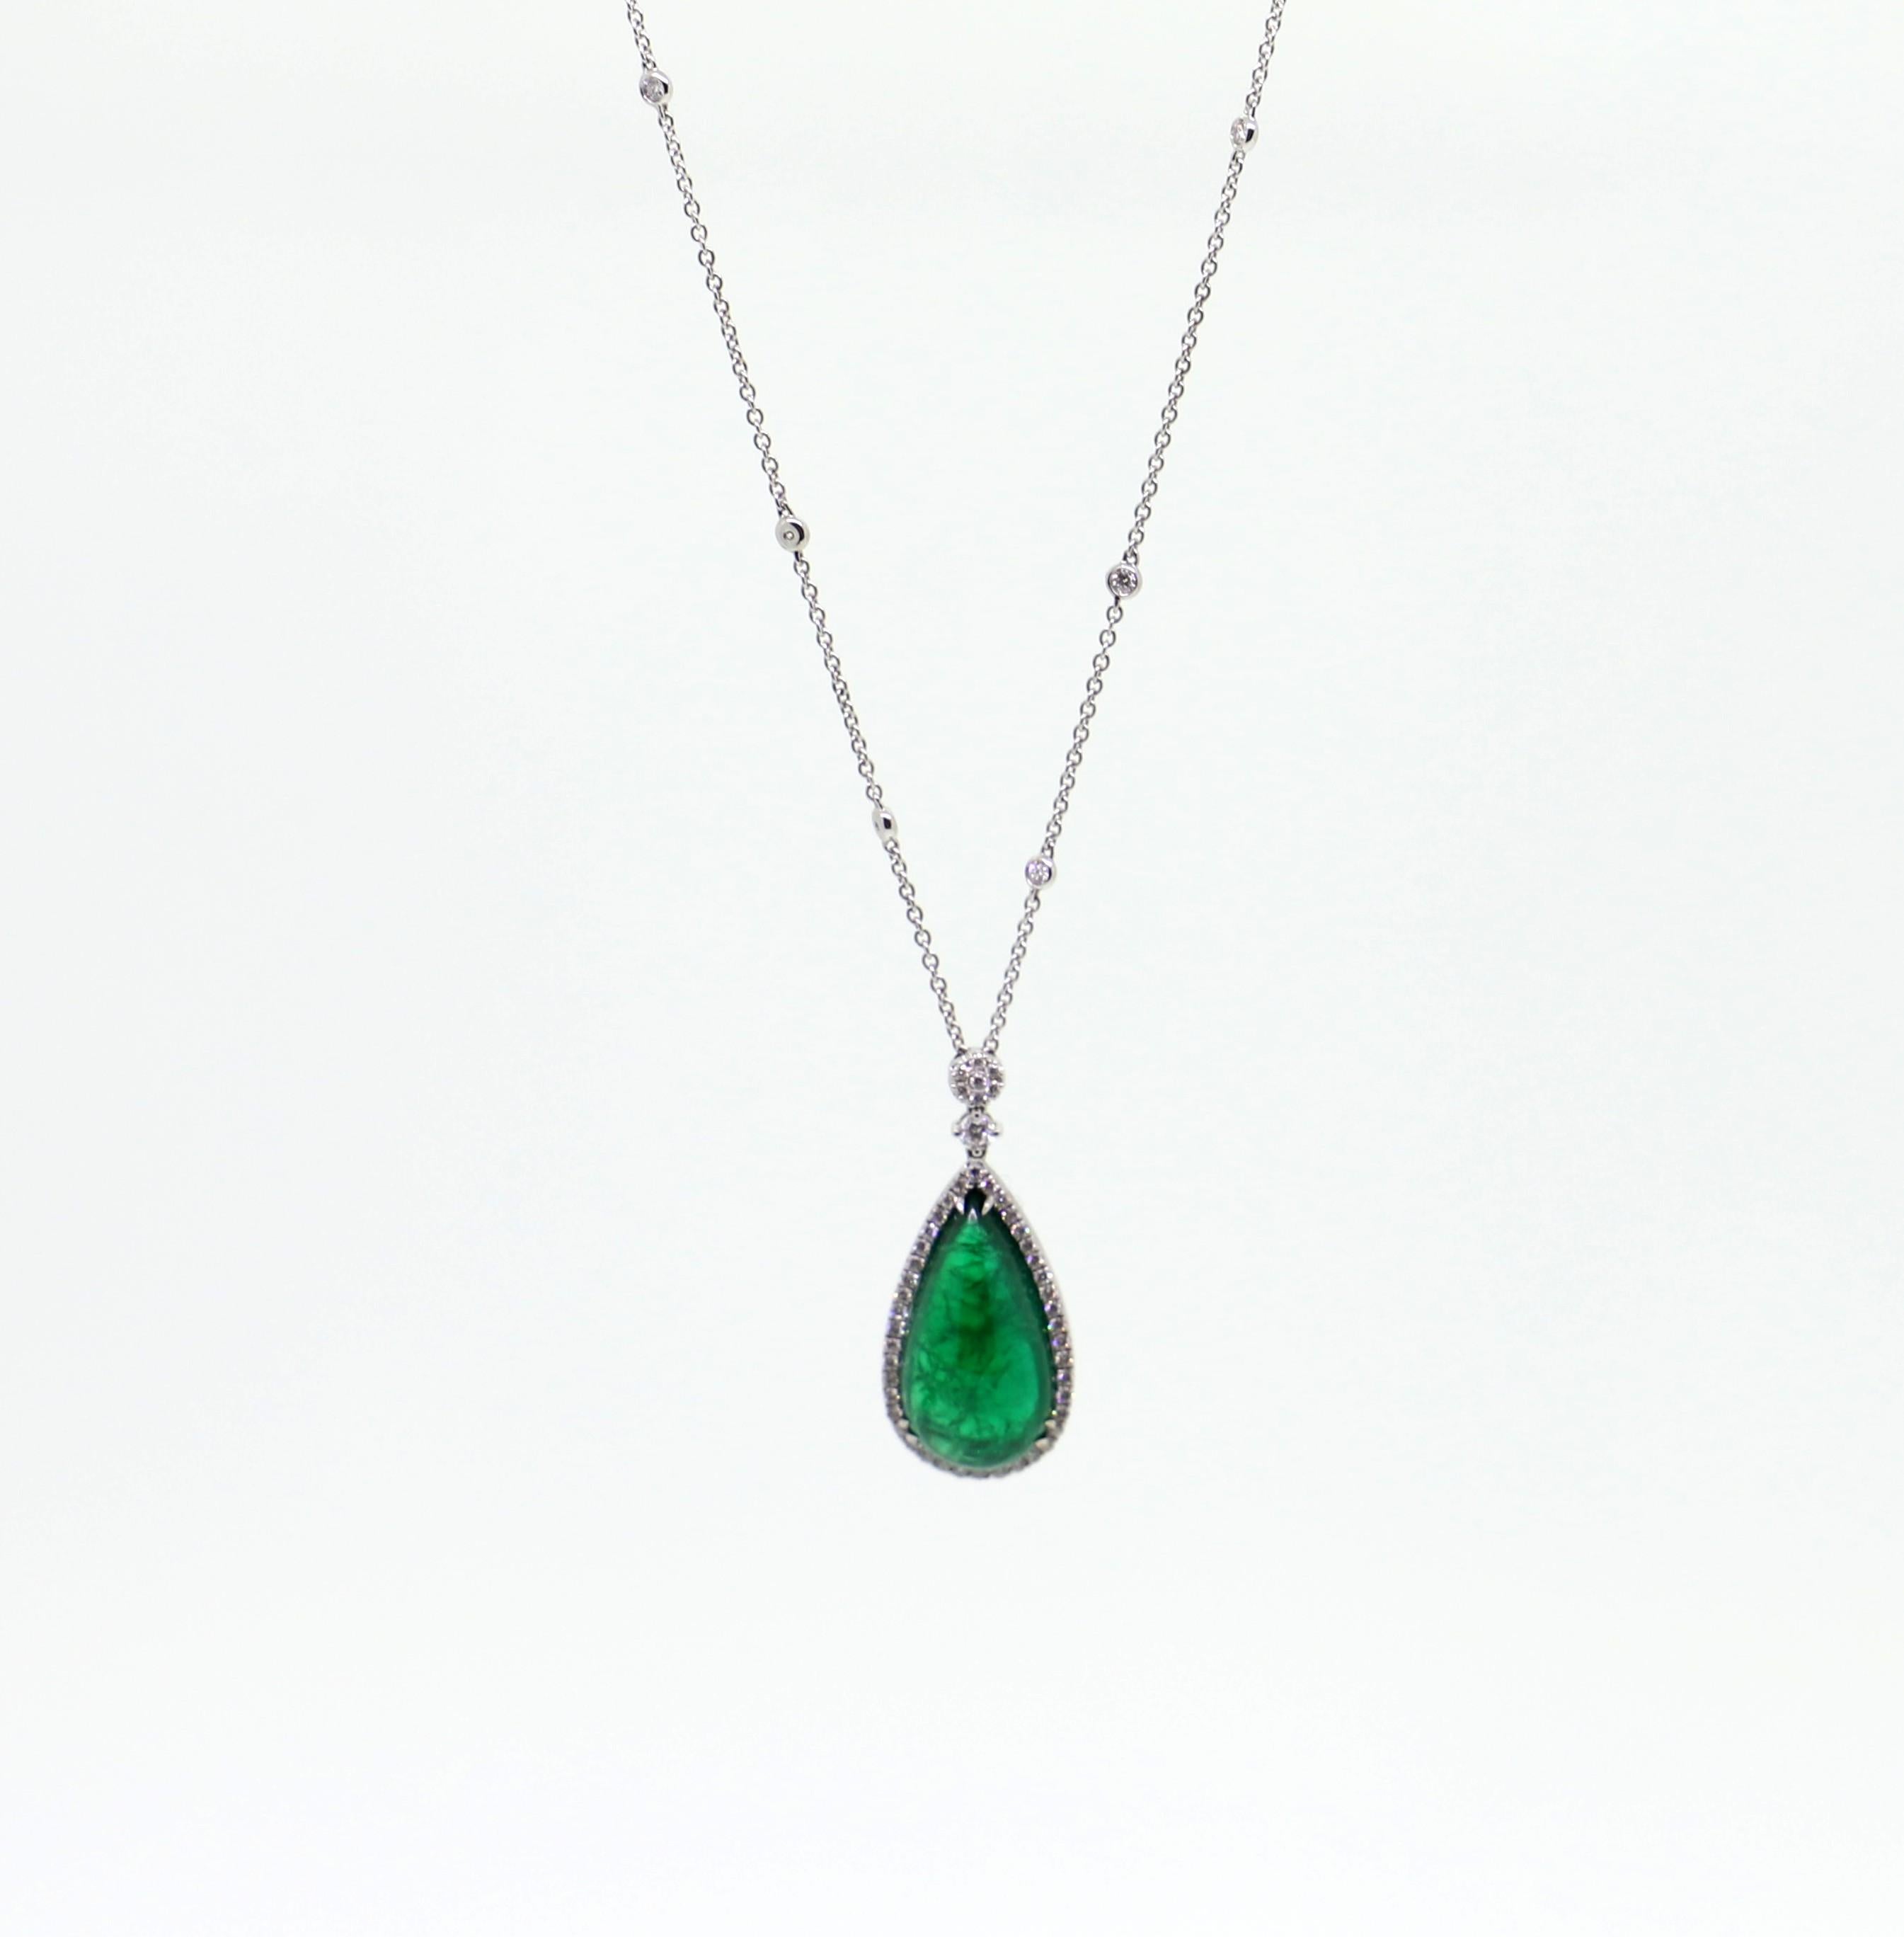 13.28 Carat Emerald Cabouchon with White Diamonds Pendant Necklace For Sale 2